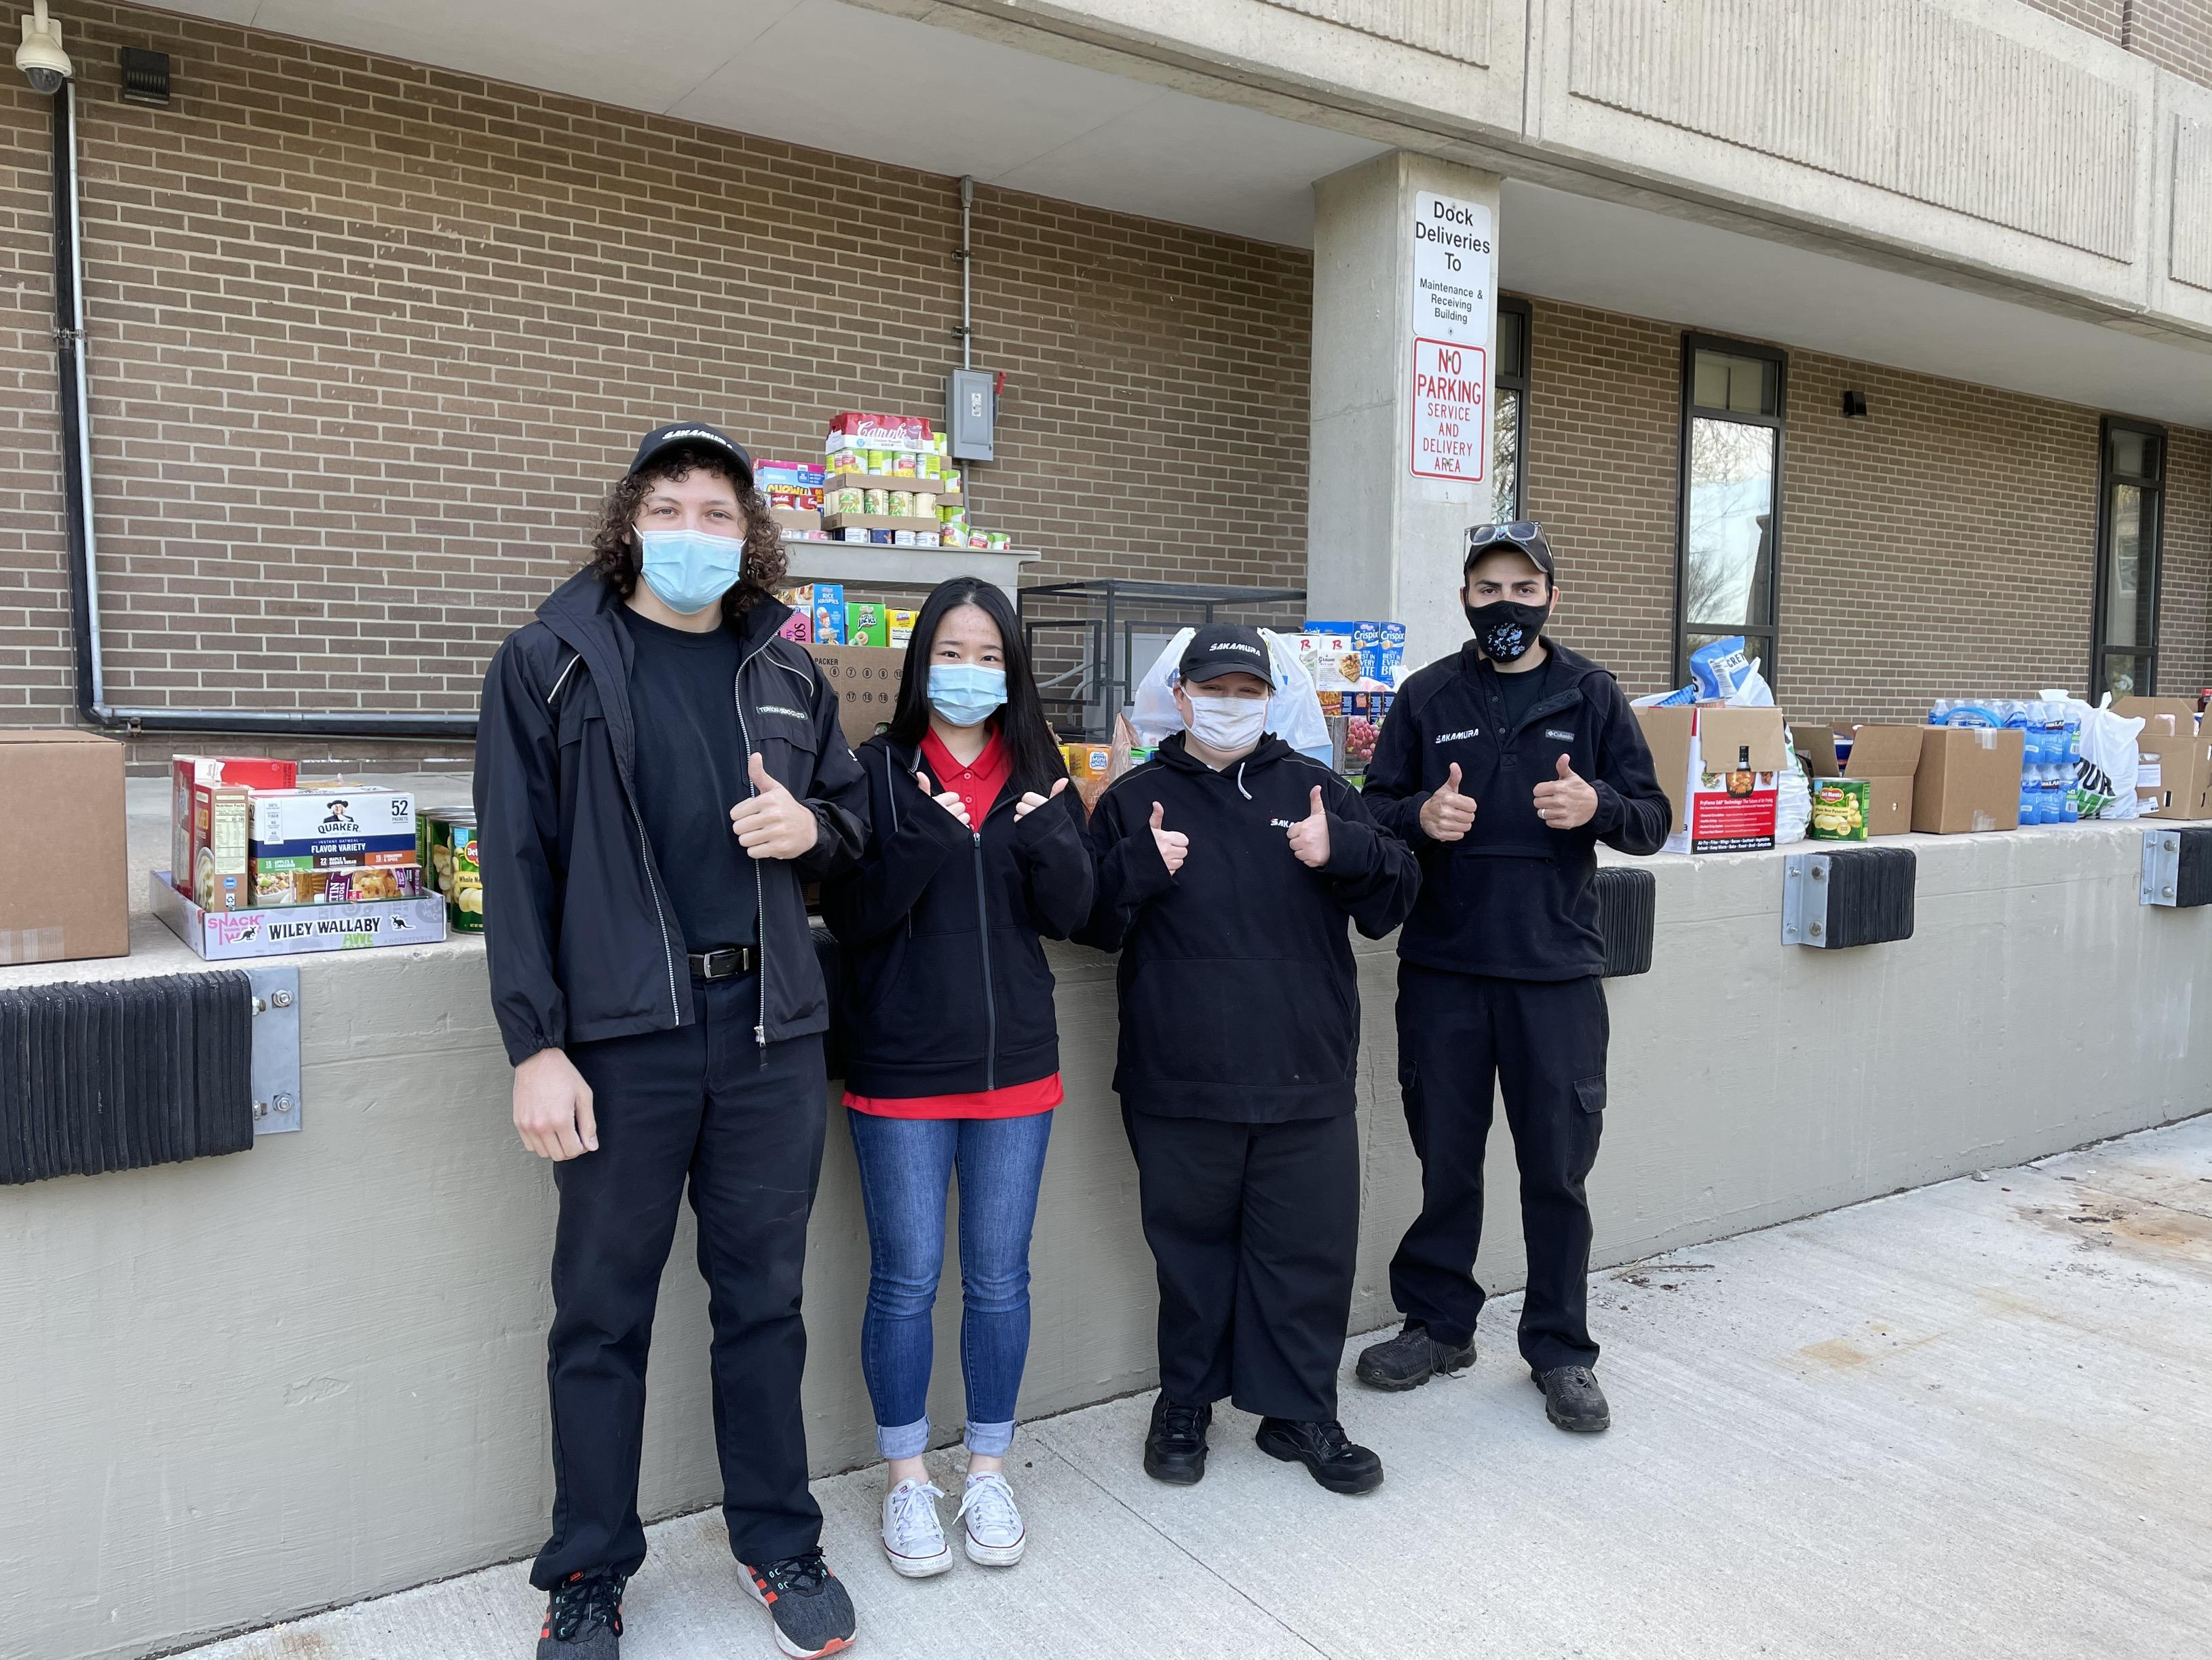 Group of 4 dressed in black stand in front of loading dock of food with thumbs up